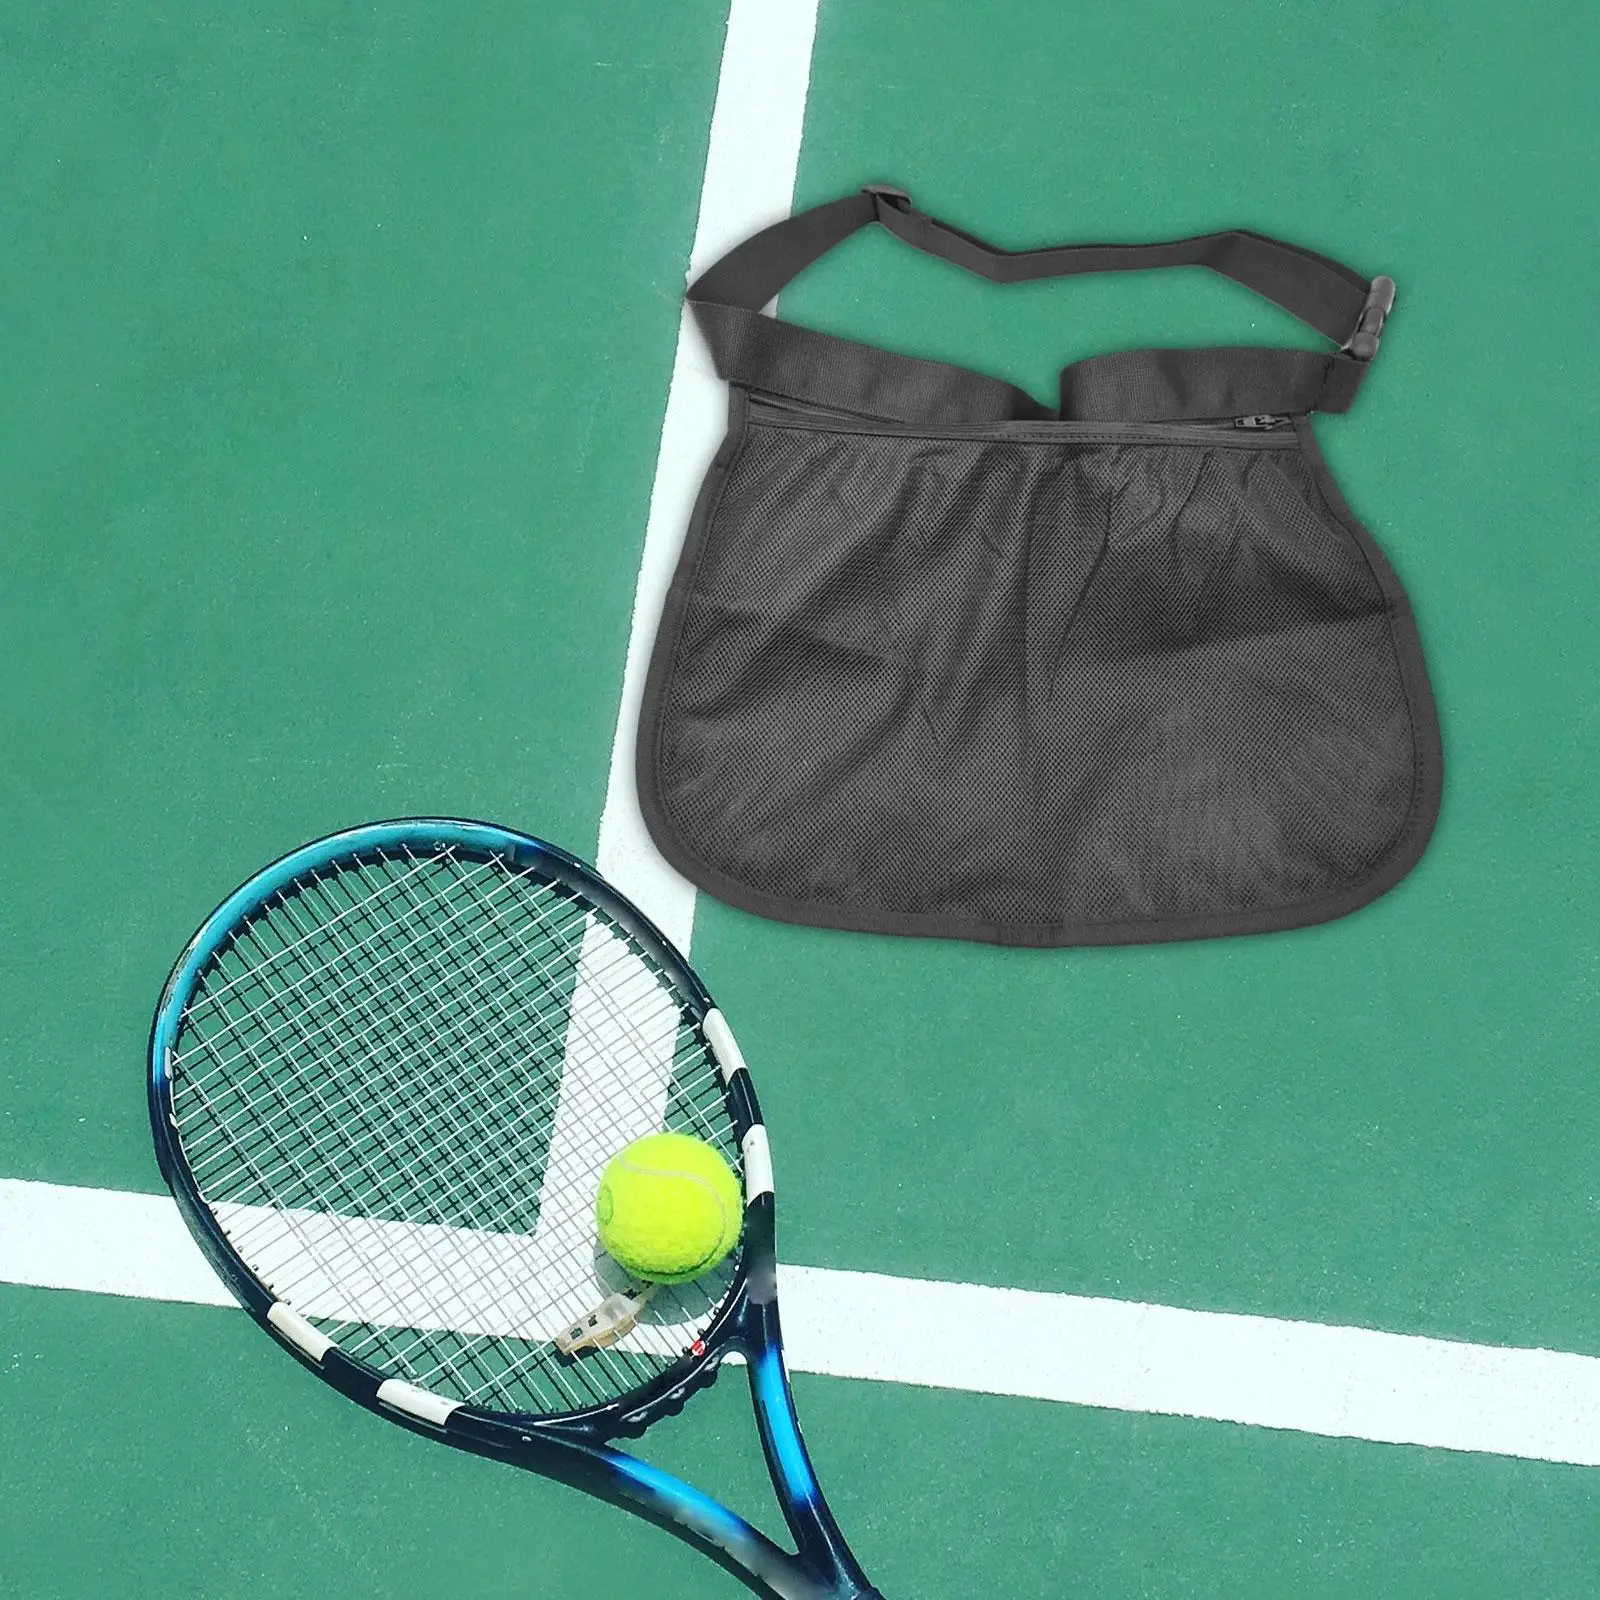 Tennis Ball Holder Sports Accessory Carrying Bag Tennis Ball Storage Bag for Workout Women Men Storing Balls and Phones Fitness